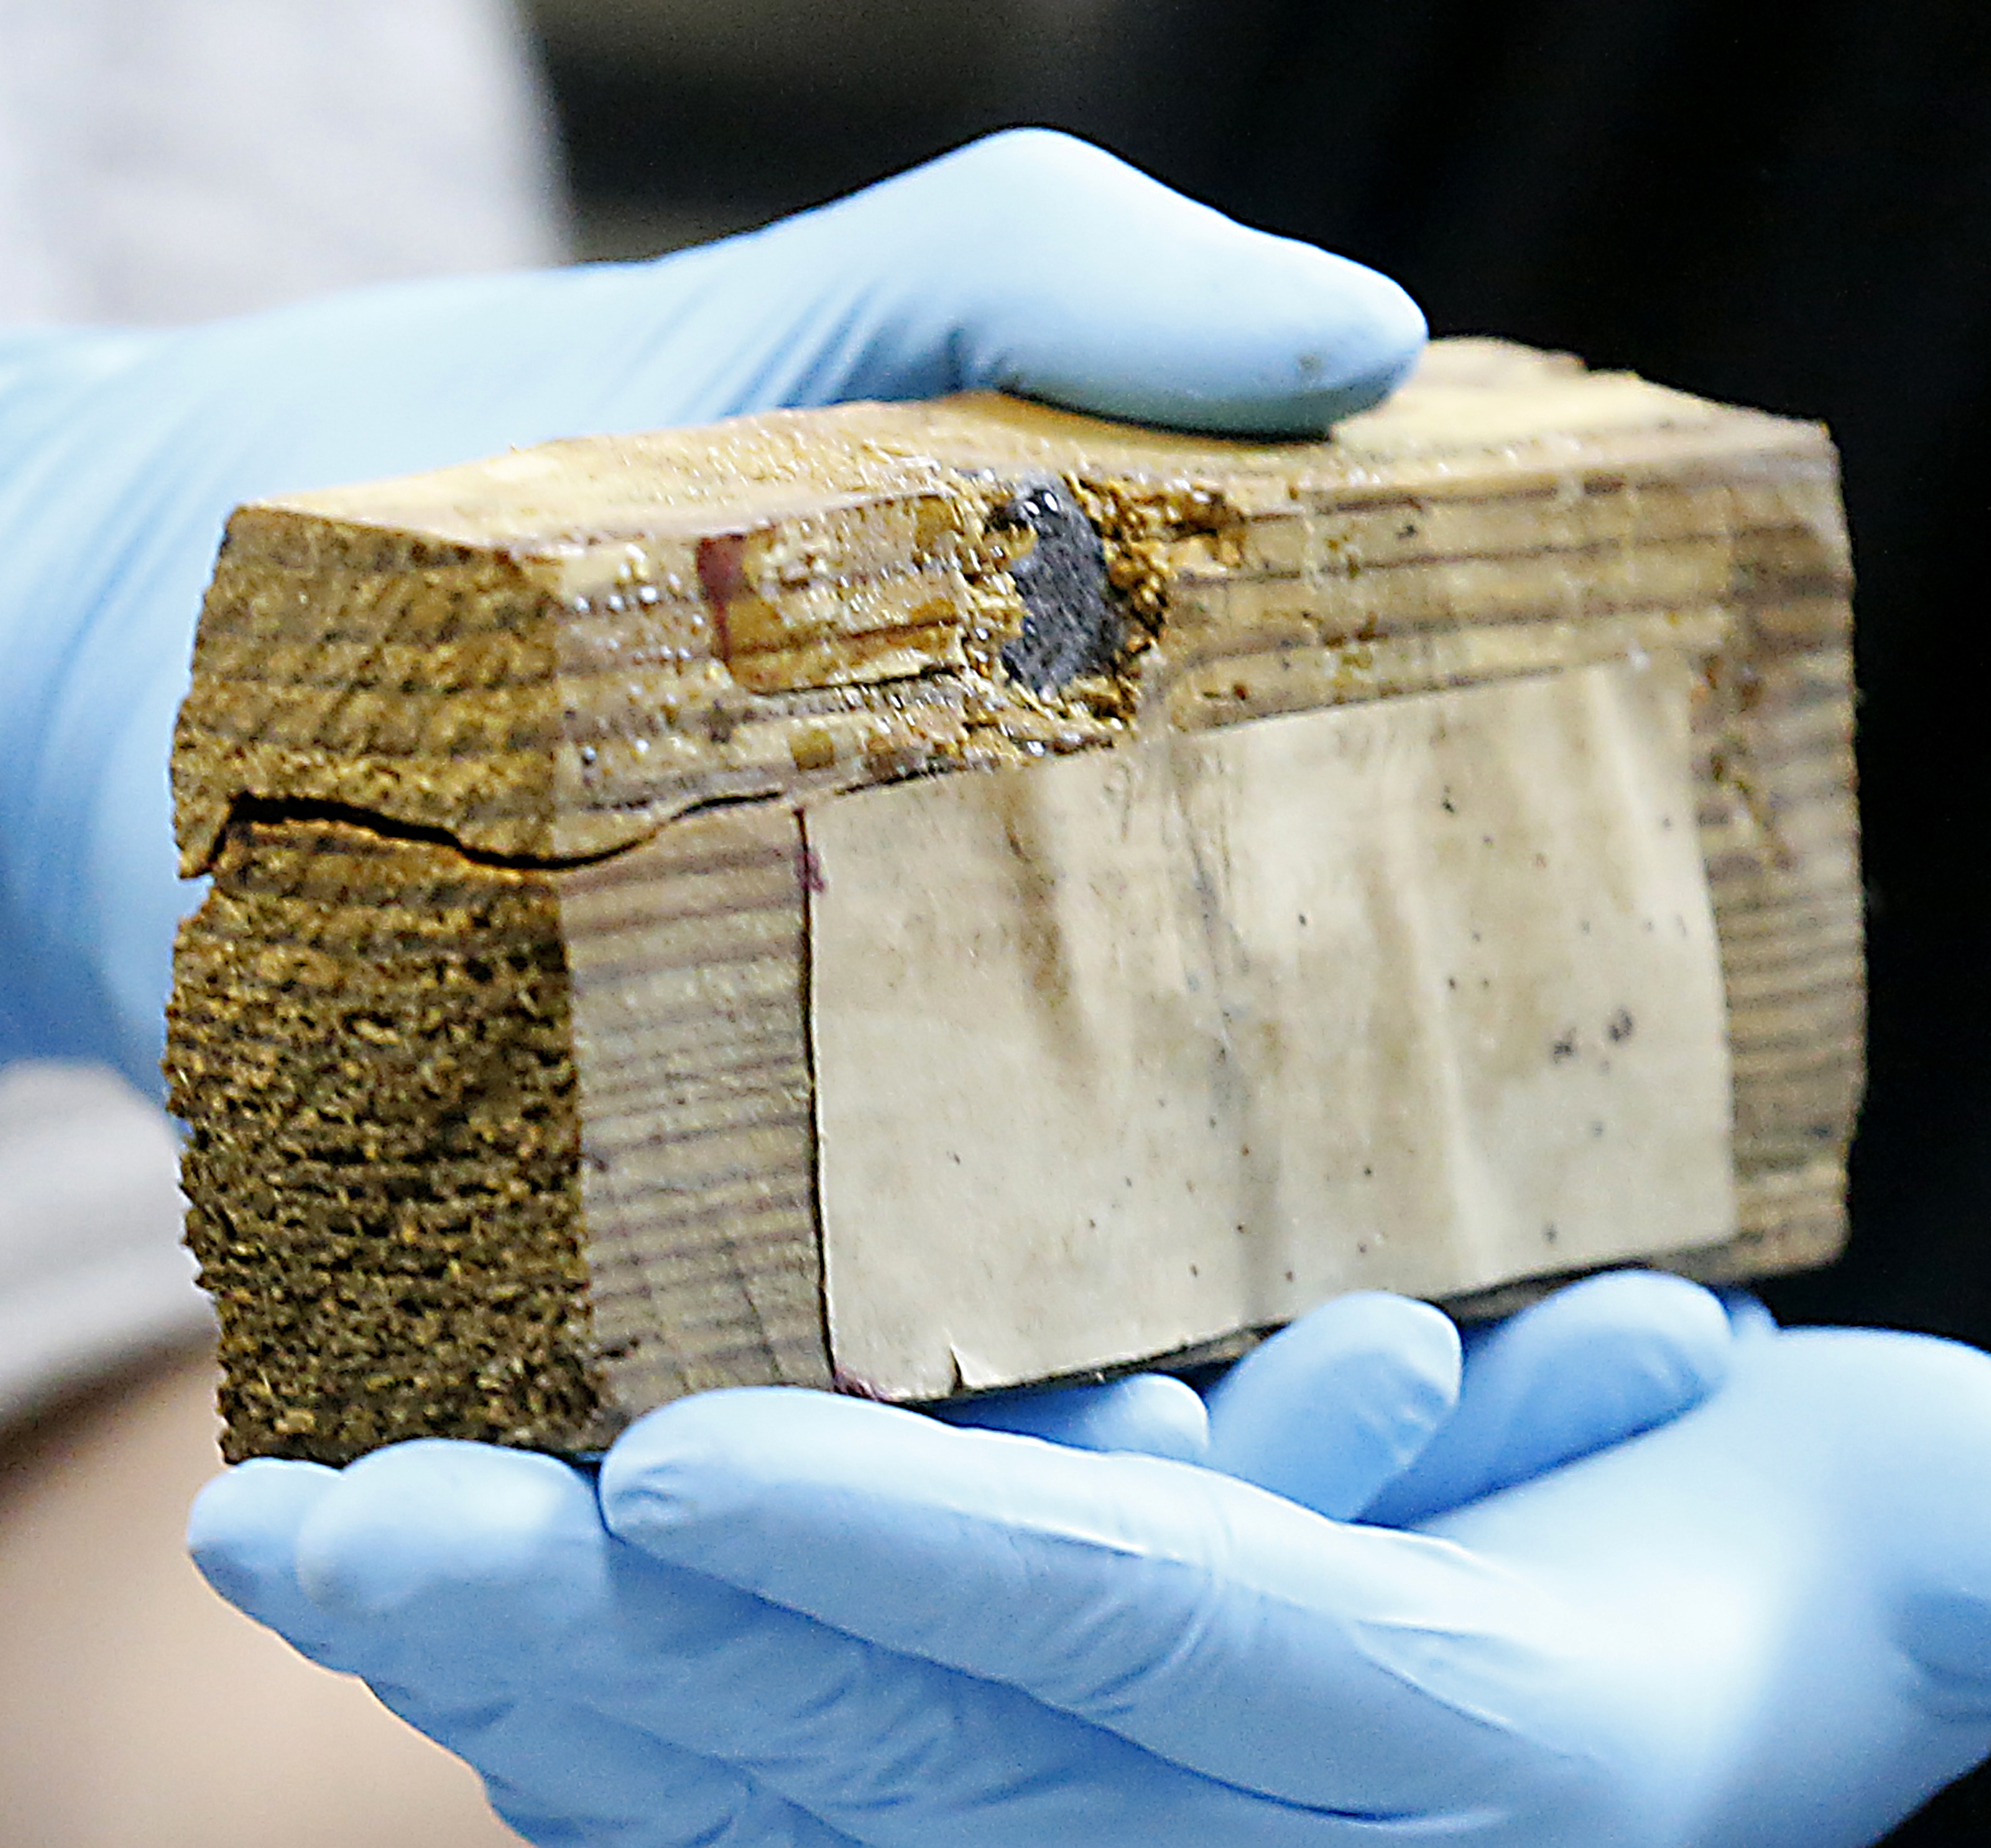 A block of wood with a bullet embedded was another artefact uncovered inside the time capsule.  